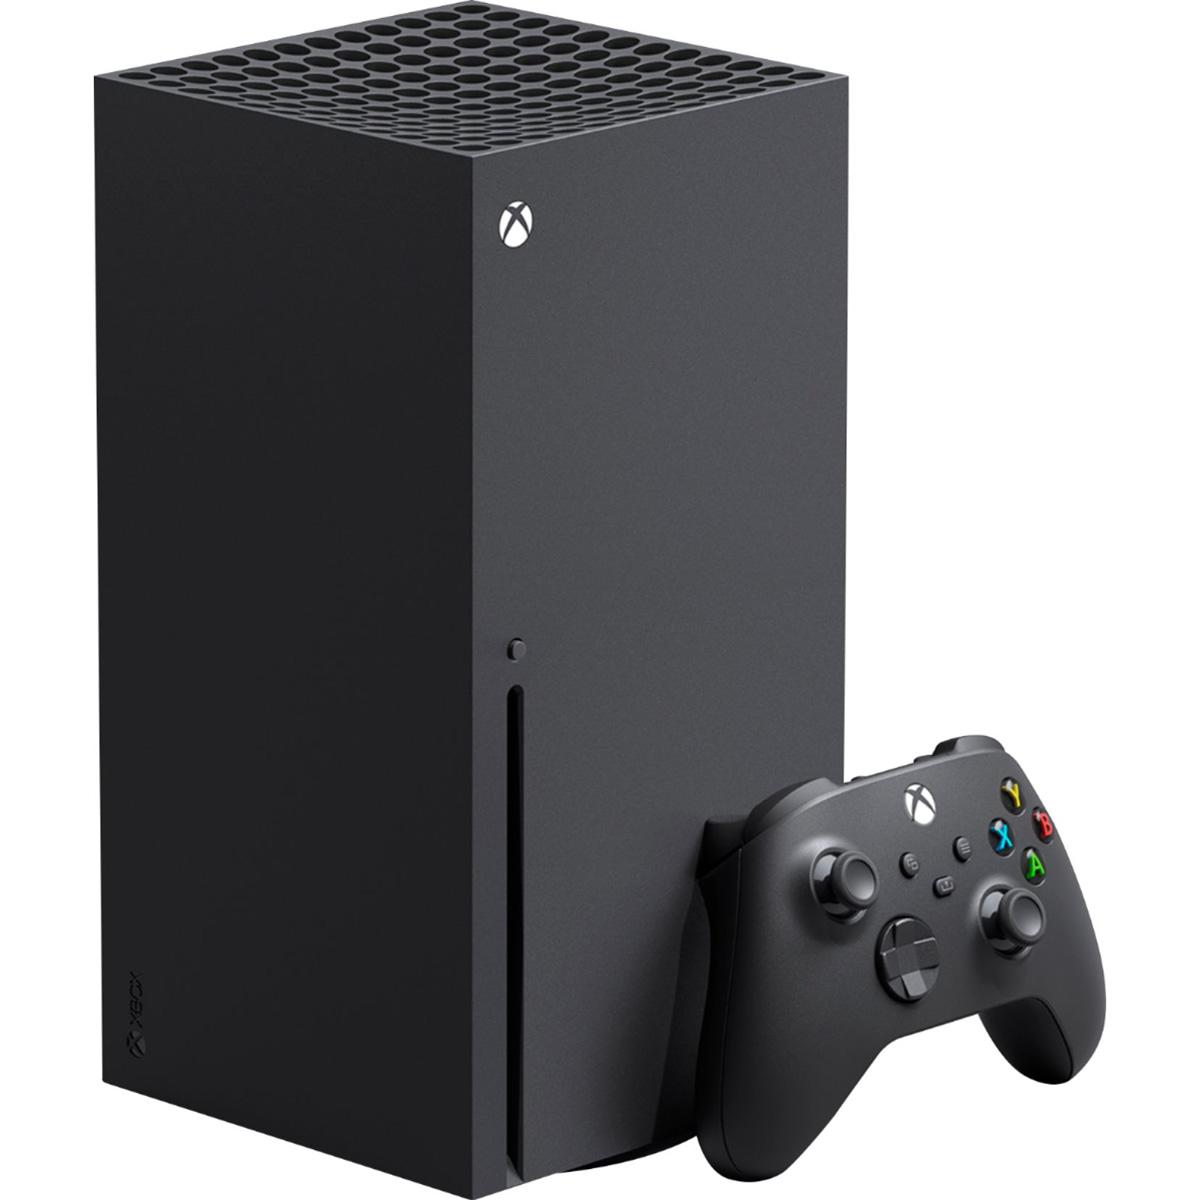 Microsoft Xbox Series X Console System Available at Amazon